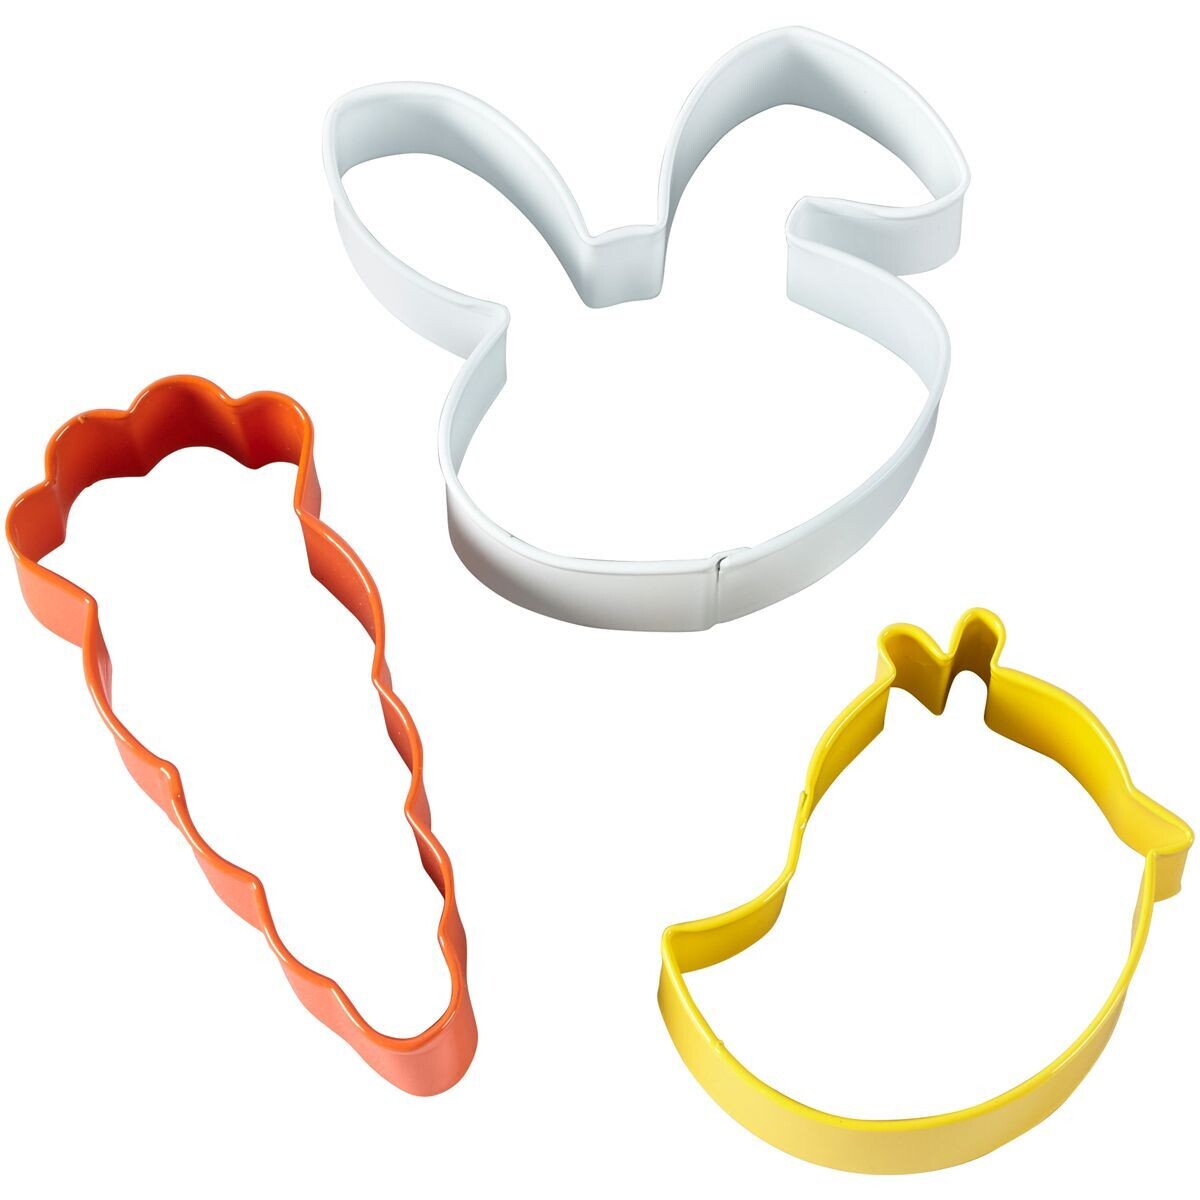 Wilton Easter Whimsical Cookie Cutter -CARROT, BUNNY, CHICK -Σετ 3τεμ Κουπ πατ με Πασχαλινό Θέμα